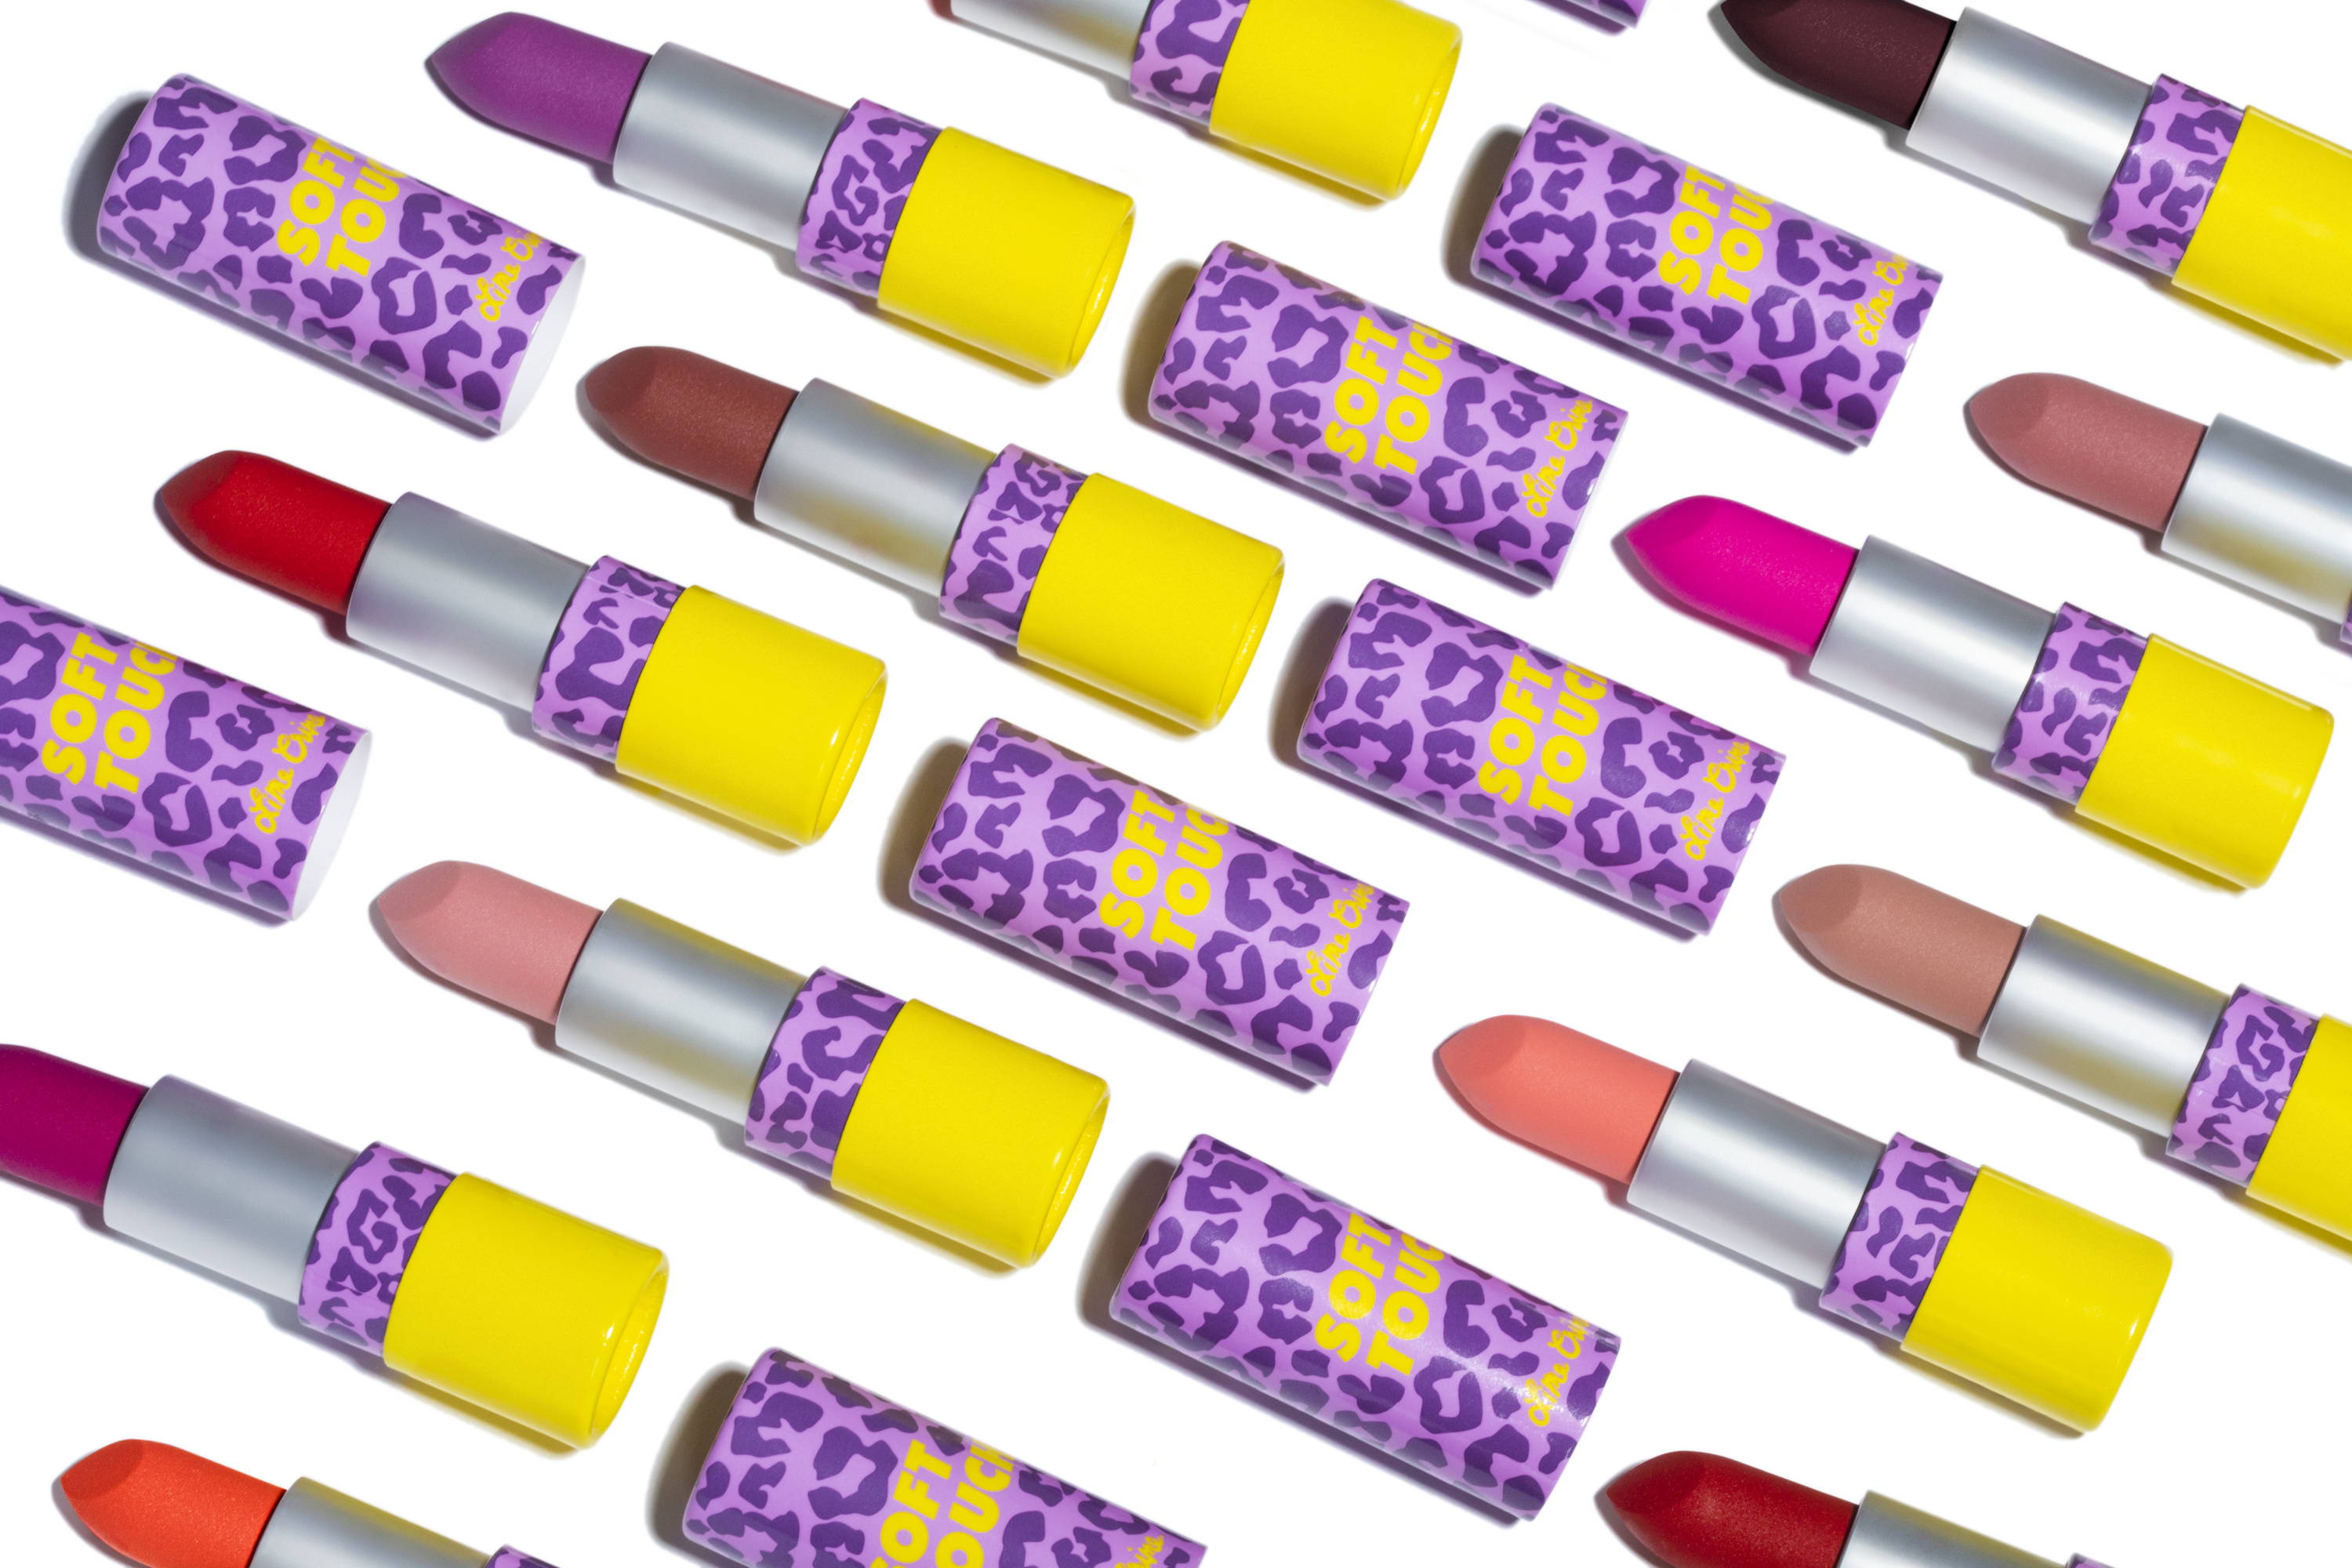 Choosing The Right Lipstick For You